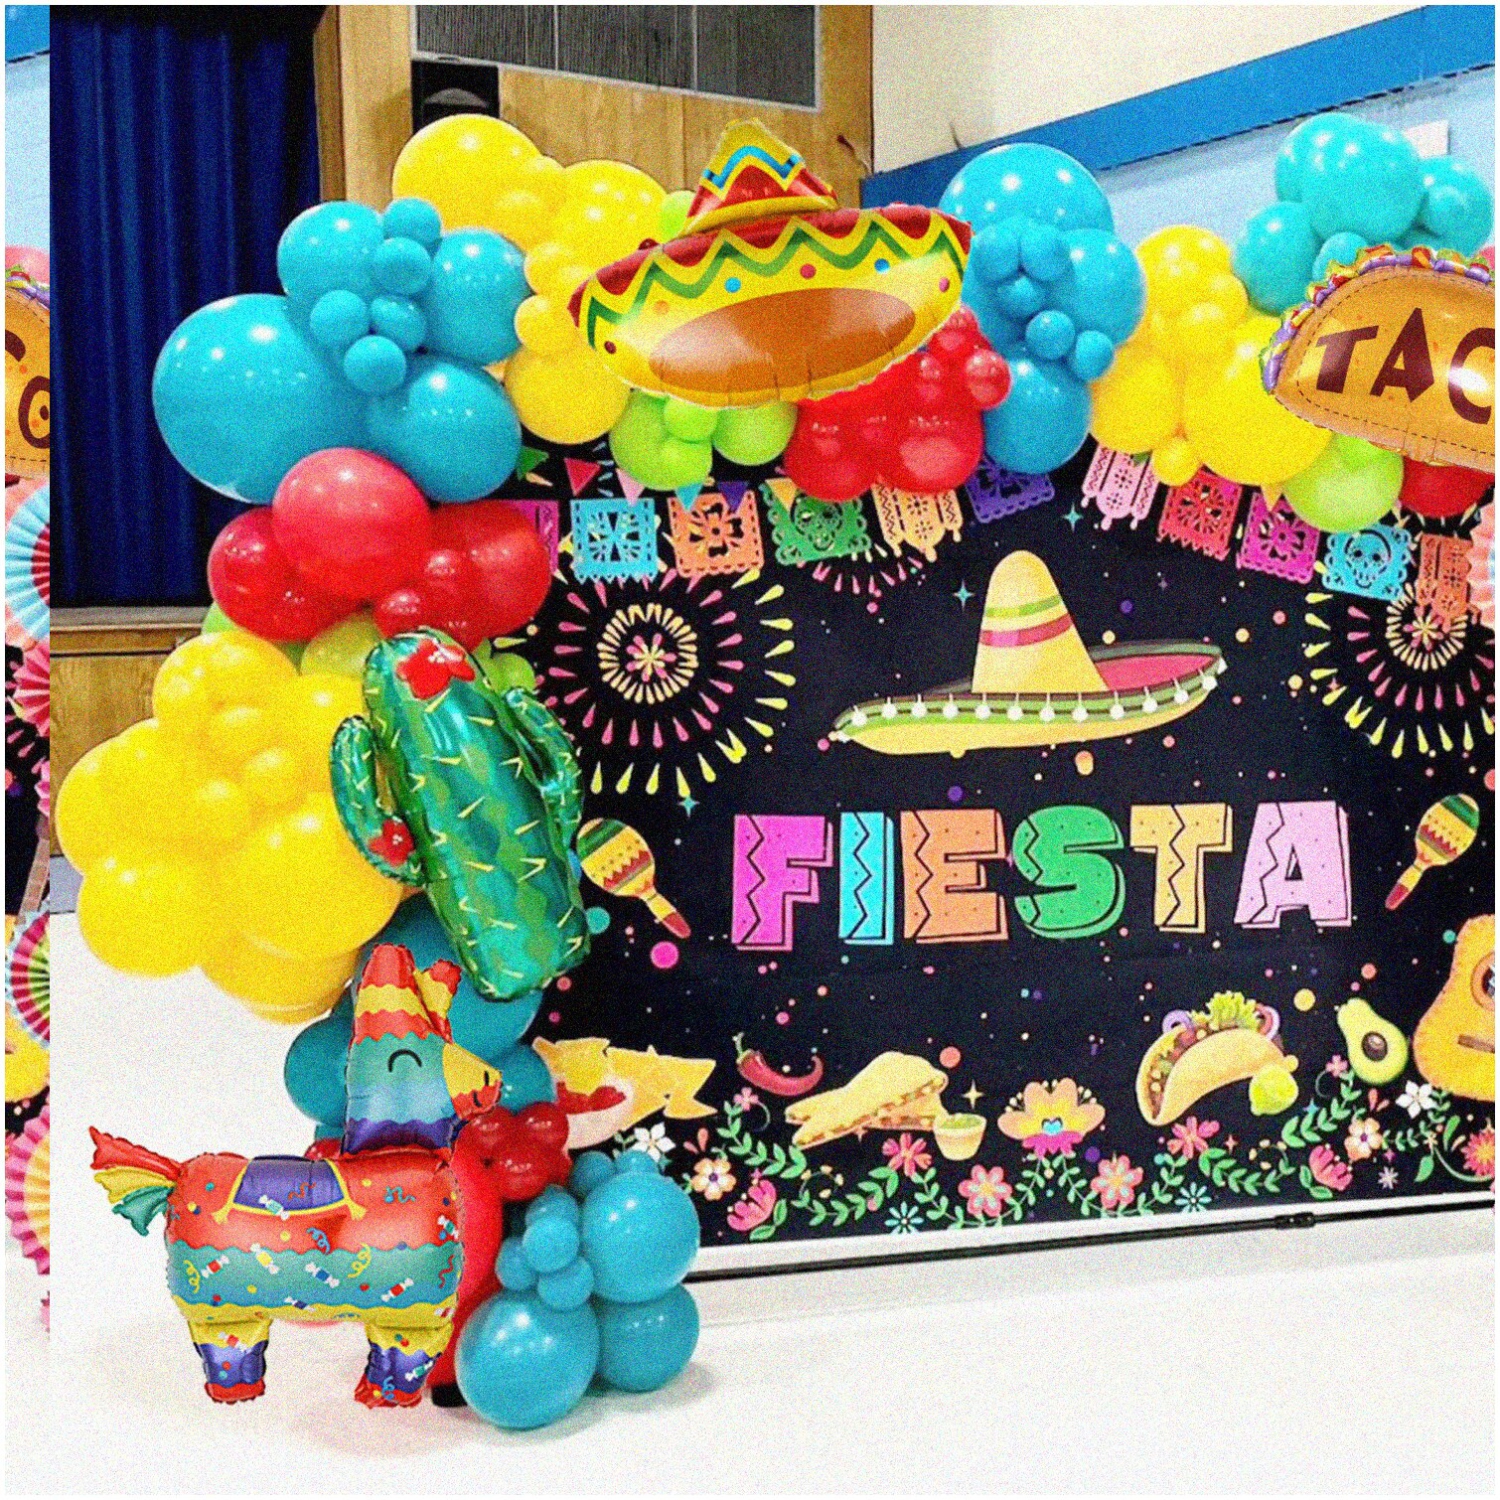 Fiesta Fiesta: Taco Twosday Extravaganza! 159pcs Mexican Party Decor Kit with Taco, Sombrero, Cactus, Llama, and F Balloons. Perfect for Cinco De Mayo, Loteria, and Fiesta-themed B